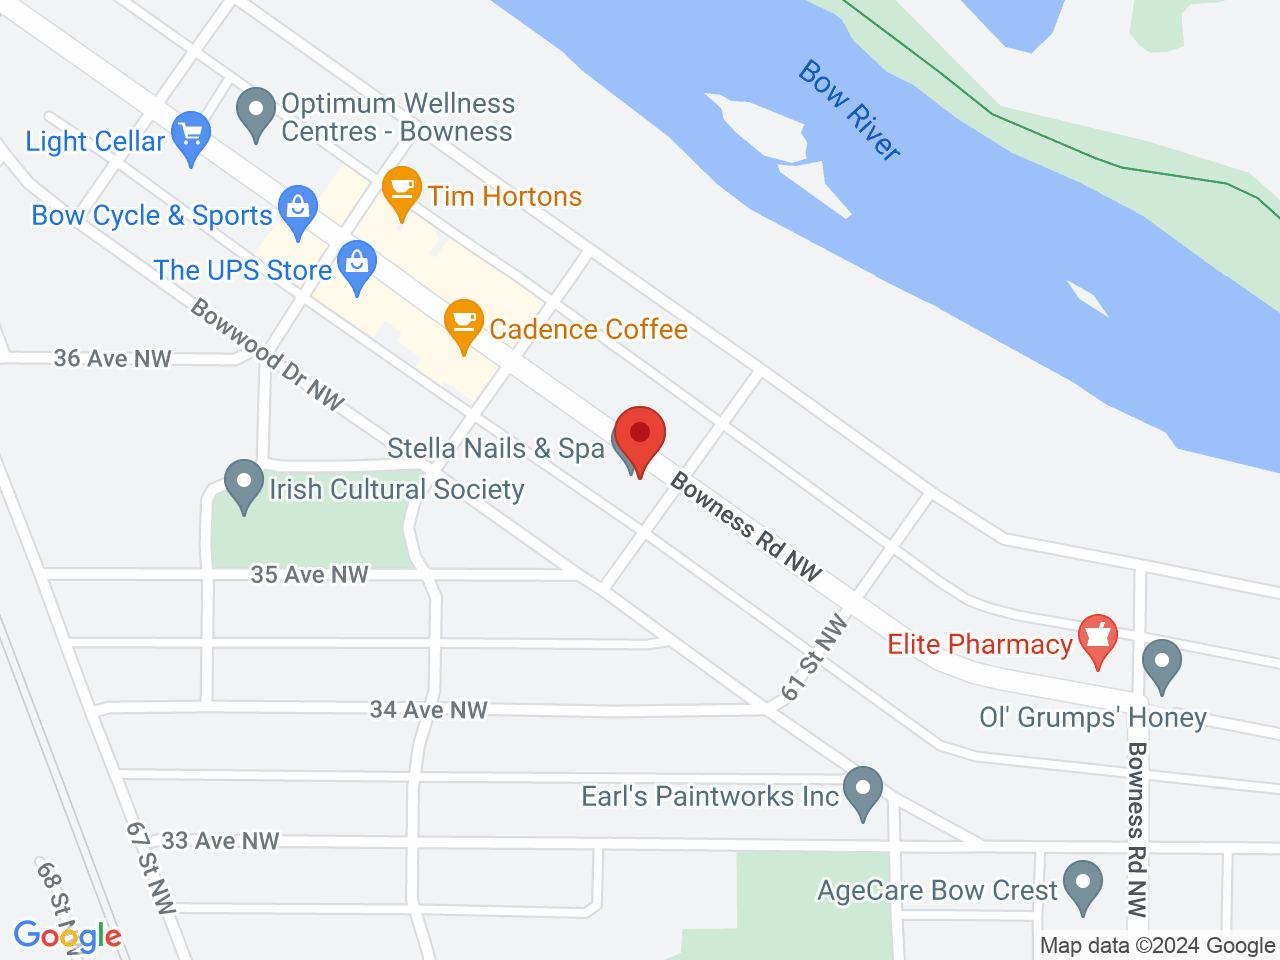 Street map for Bow Cannabis, 6305 Bowness Rd. NW, Calgary AB